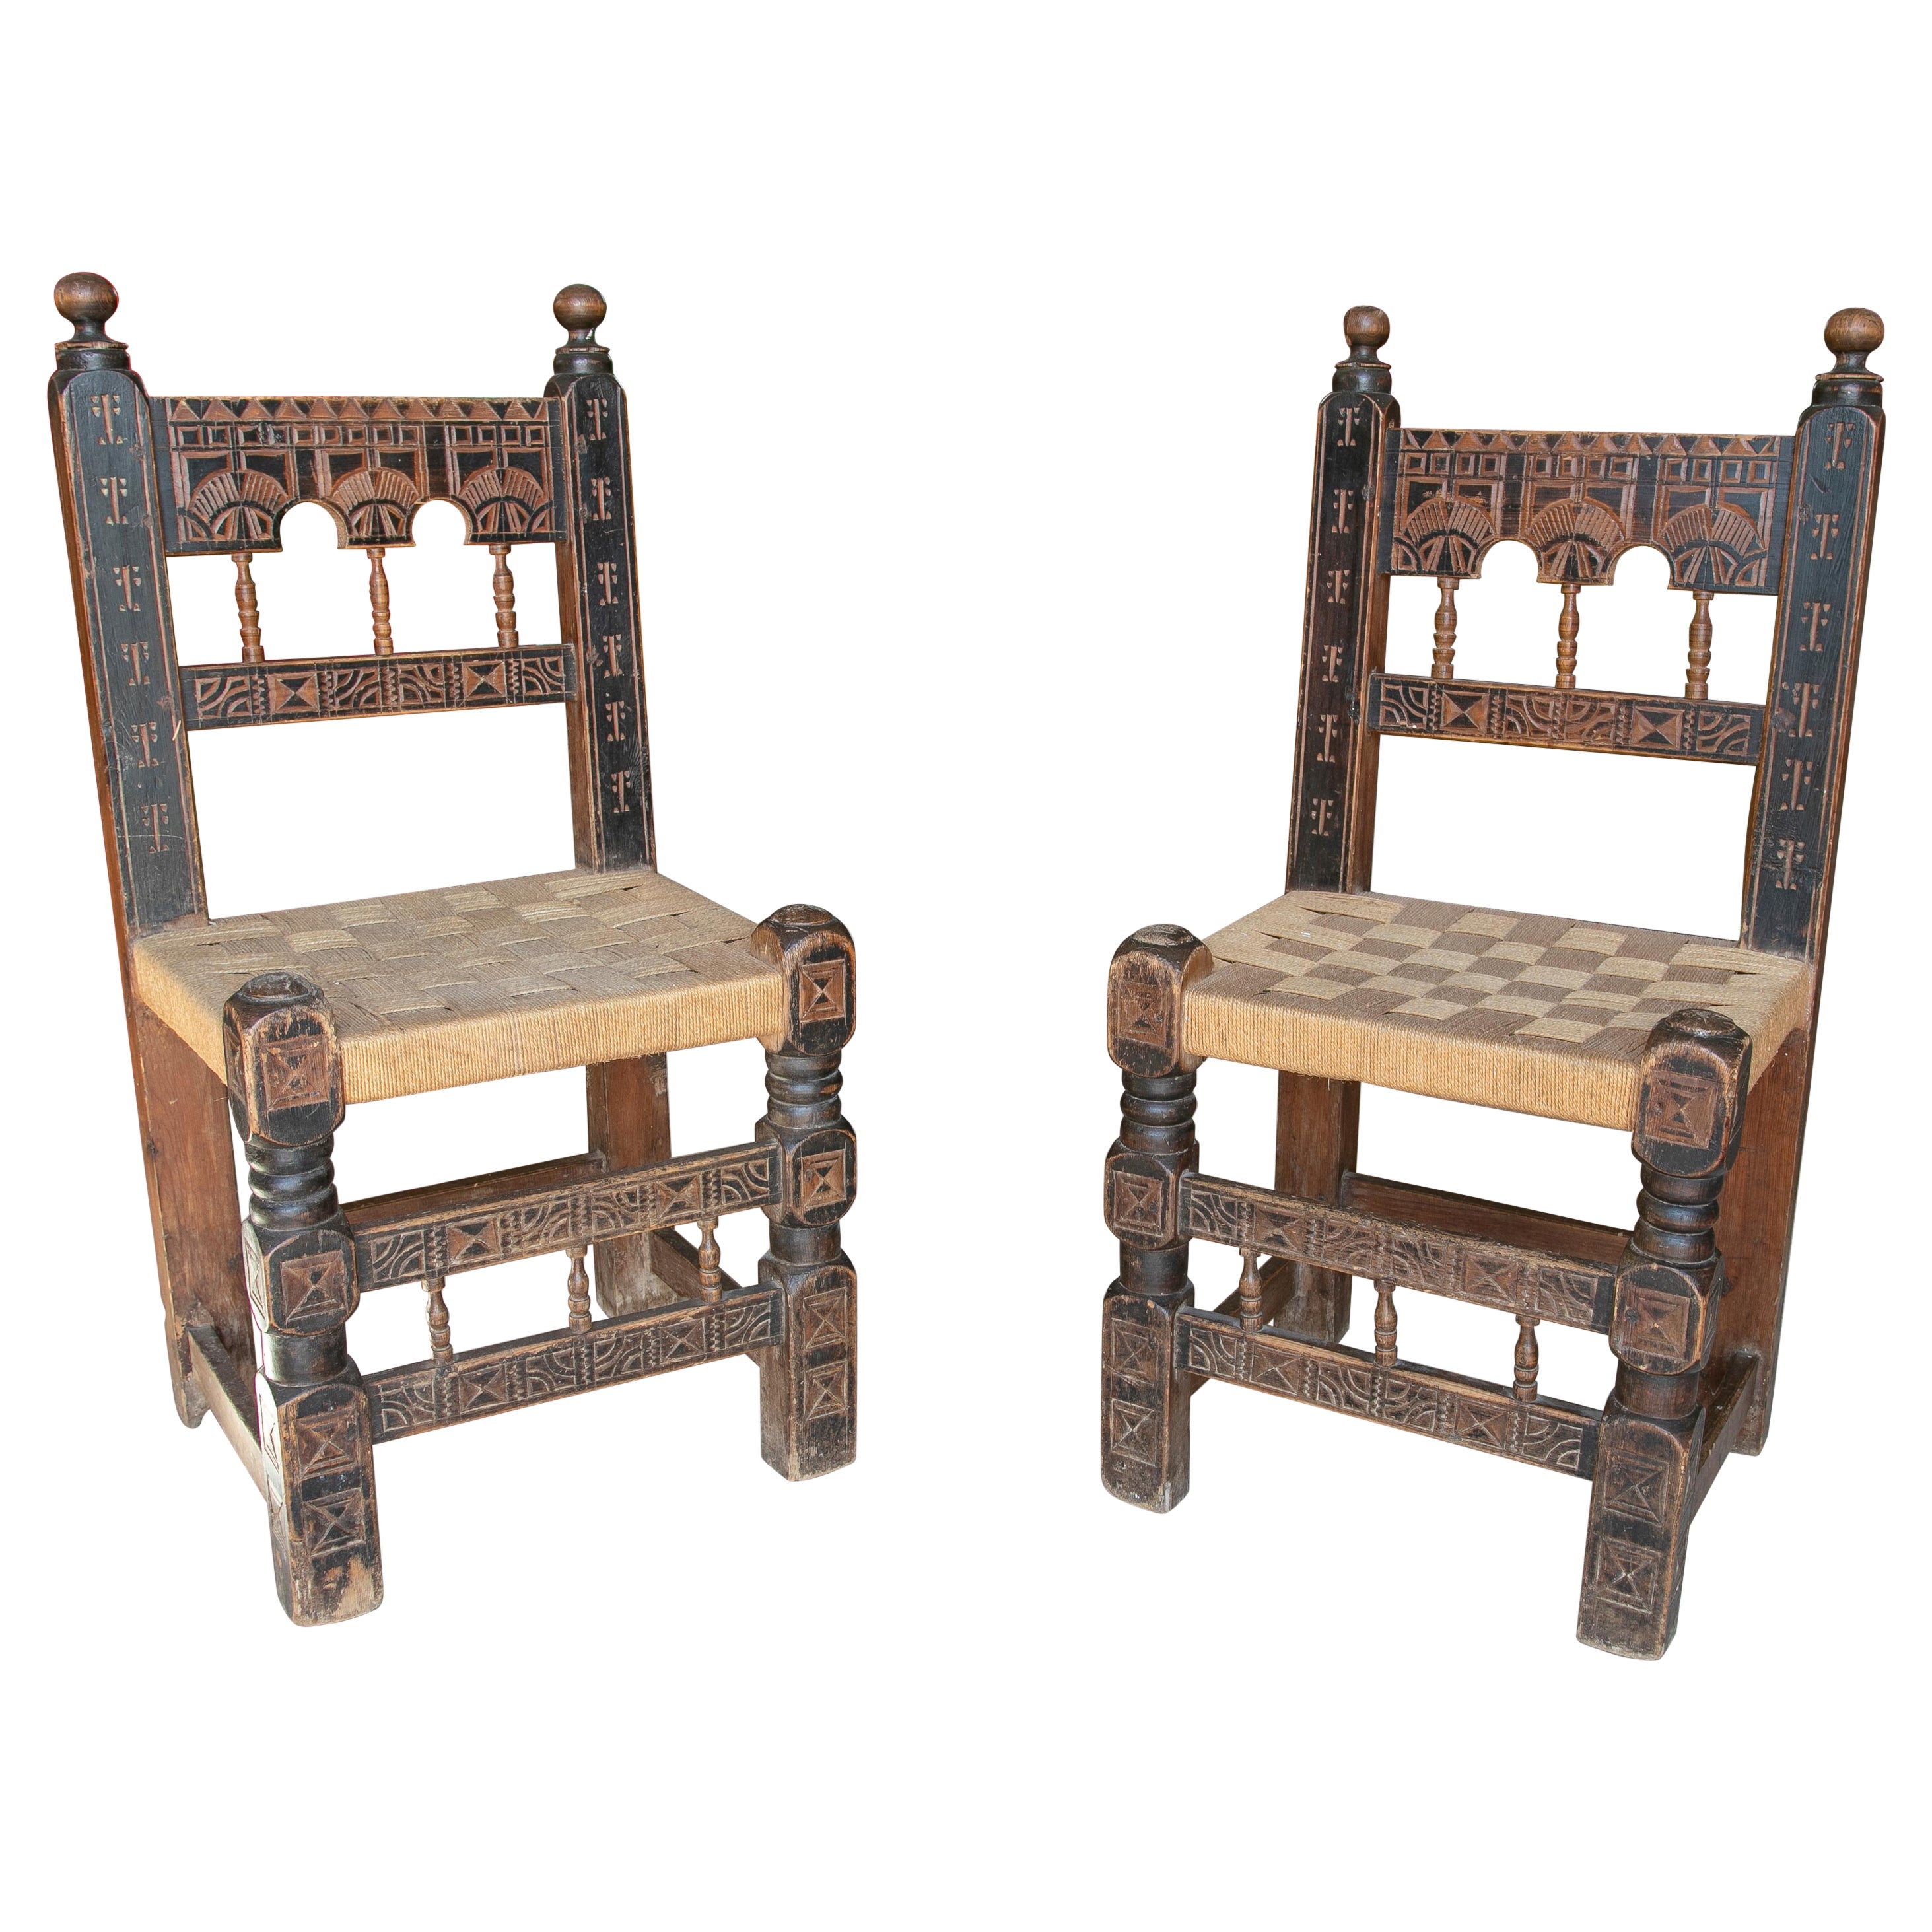 Pair of 1920s Spanish Hand Carved Painted Wooden Chairs w/ Woven Bulrush Seats For Sale